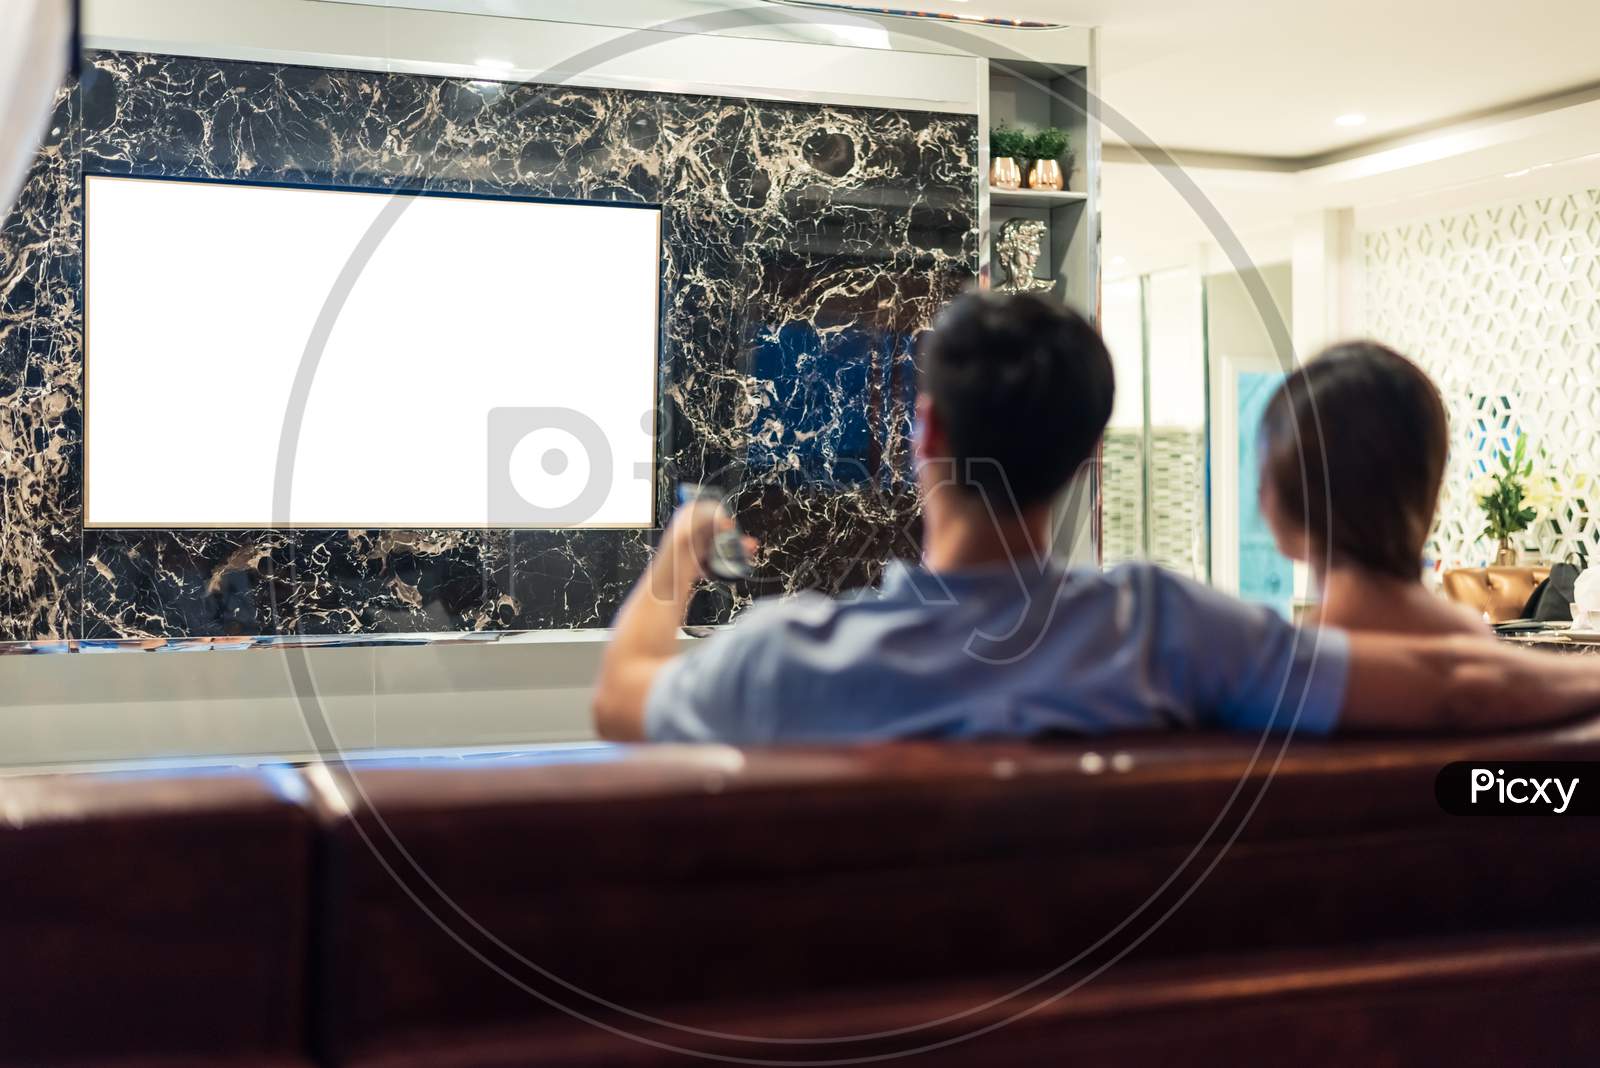 Asian Couples Watching White Blank Screen Display Television For Advertising Template Background.  People Lifestyles Concept. Lockdown Social Distancing Work From Home. Selective Focus On Tv